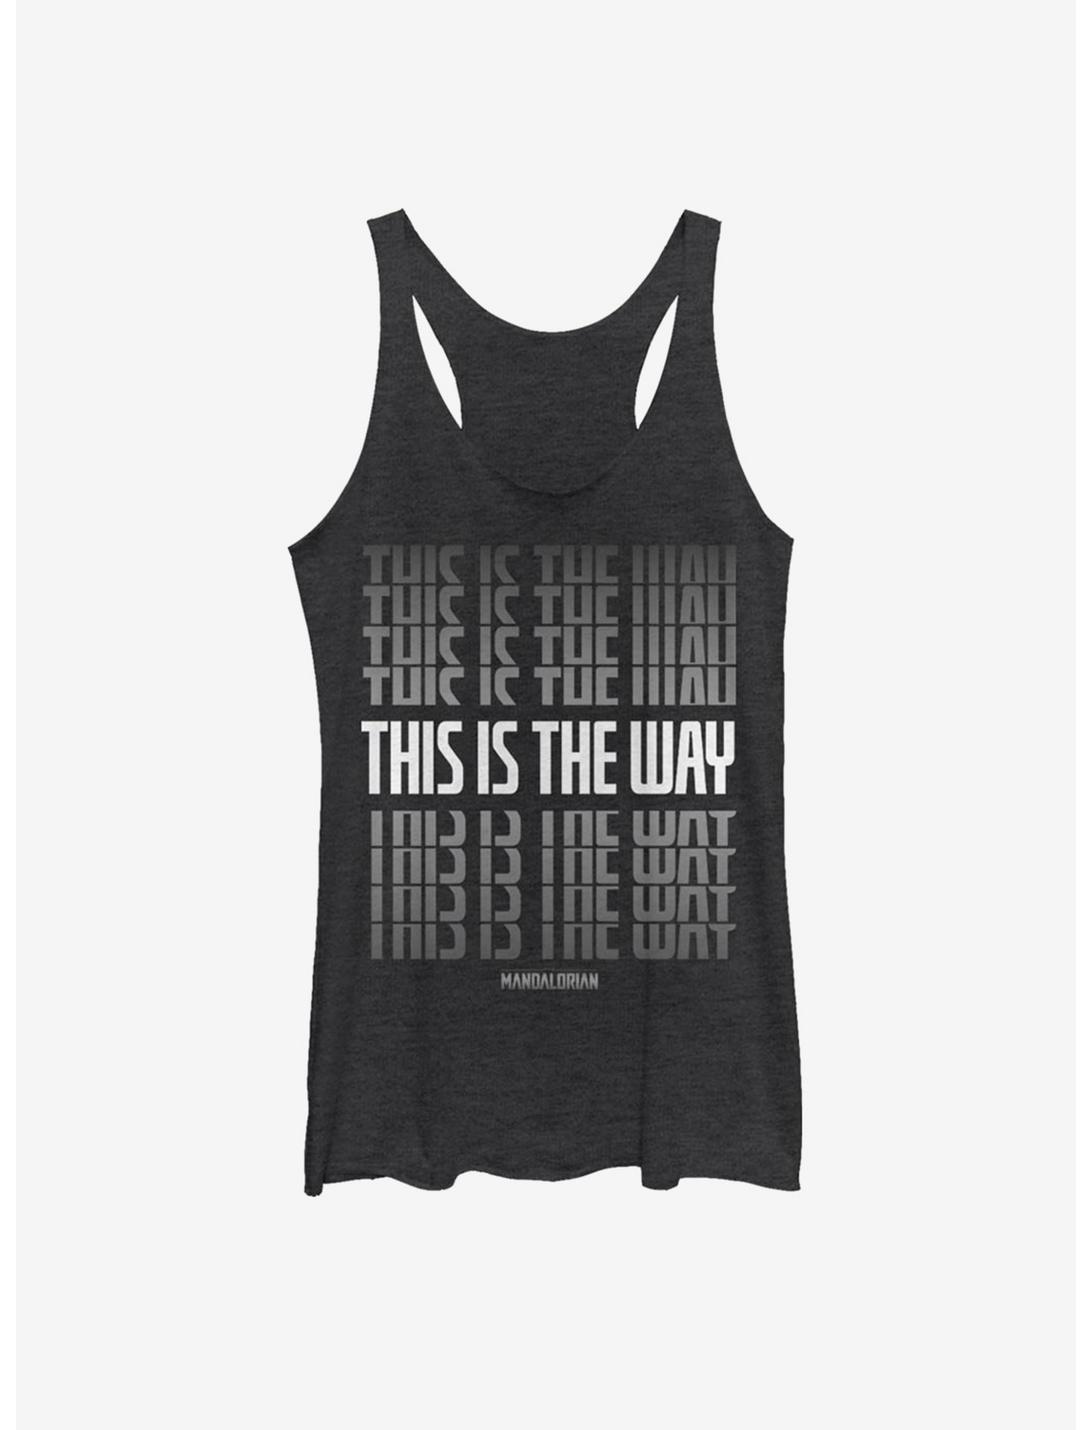 Plus Size Star Wars The Mandalorian This Is The Way Stack Womens Tank Top, BLK HTR, hi-res